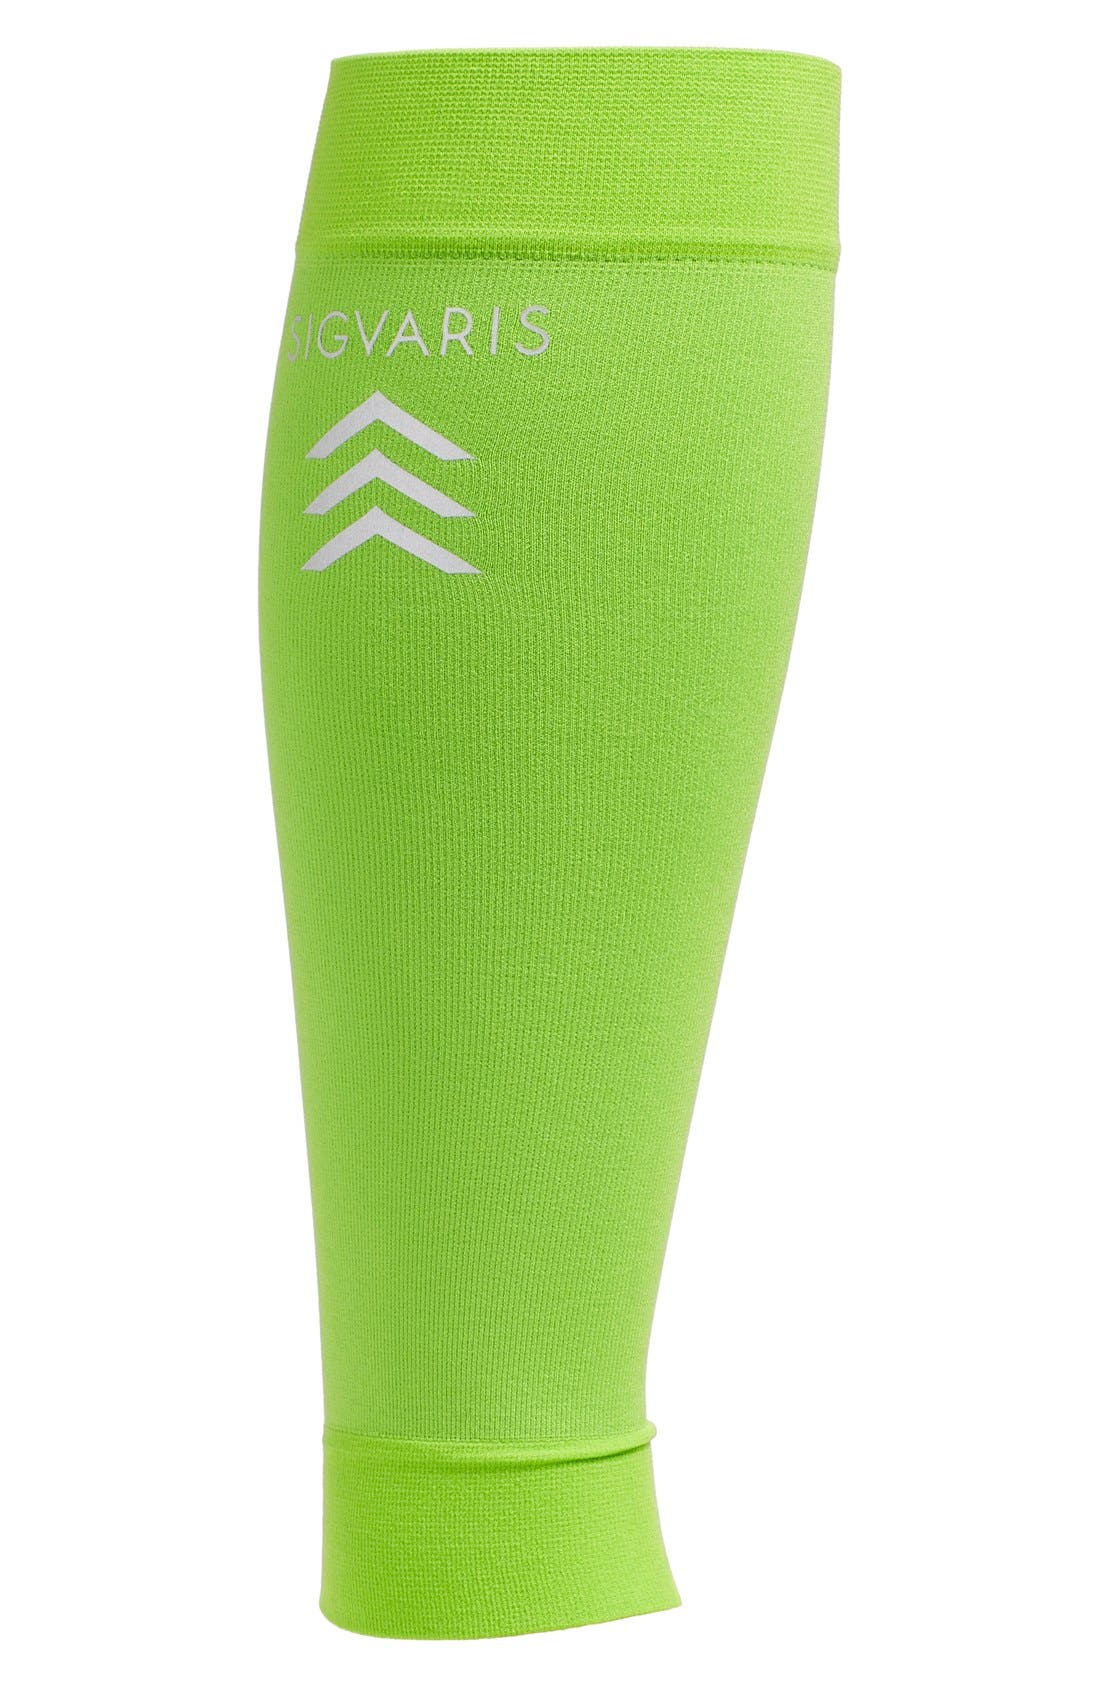 UPC 745129213787 product image for Men's Insignia By Sigvaris 'Sports' Graduated Compression Performance Calf Sleev | upcitemdb.com